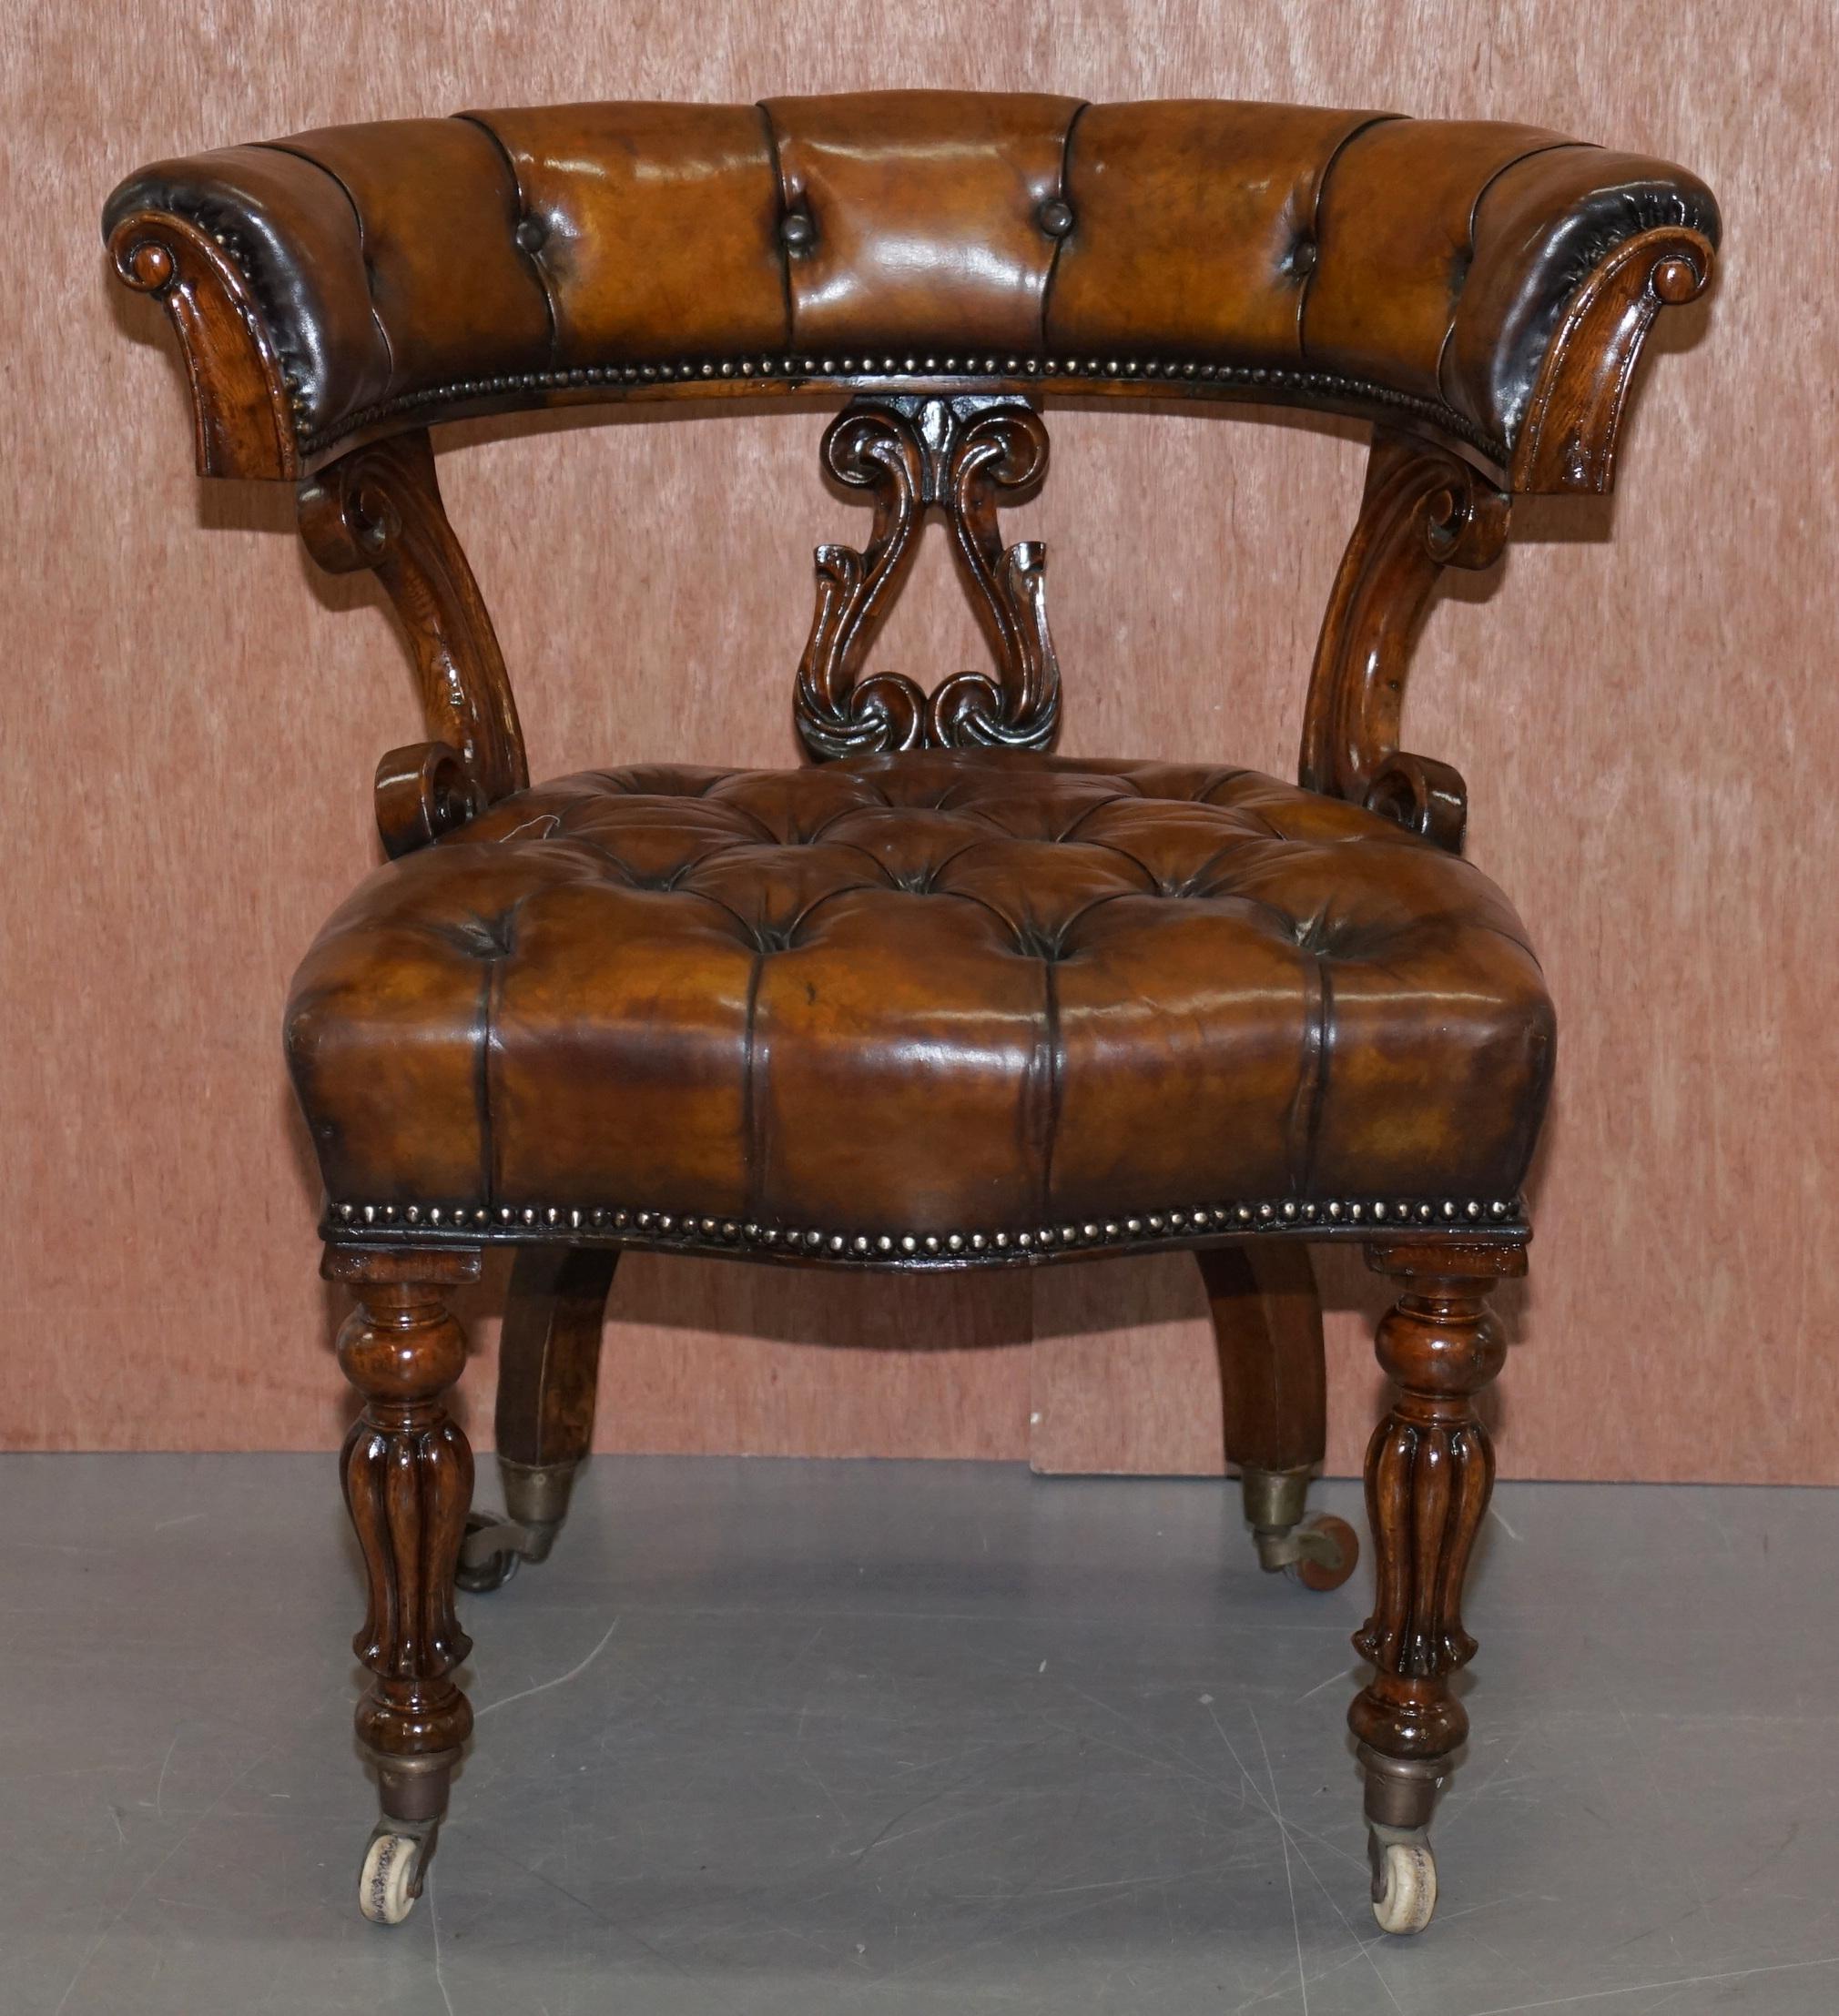 We are delighted to offer for sale this very fully restored circa 1830 horse shoe back Chesterfield hand dyed brown leather office chair

This chair is really quite exquisite, its one of the earliest types of swivel chairs ever made, the frame is